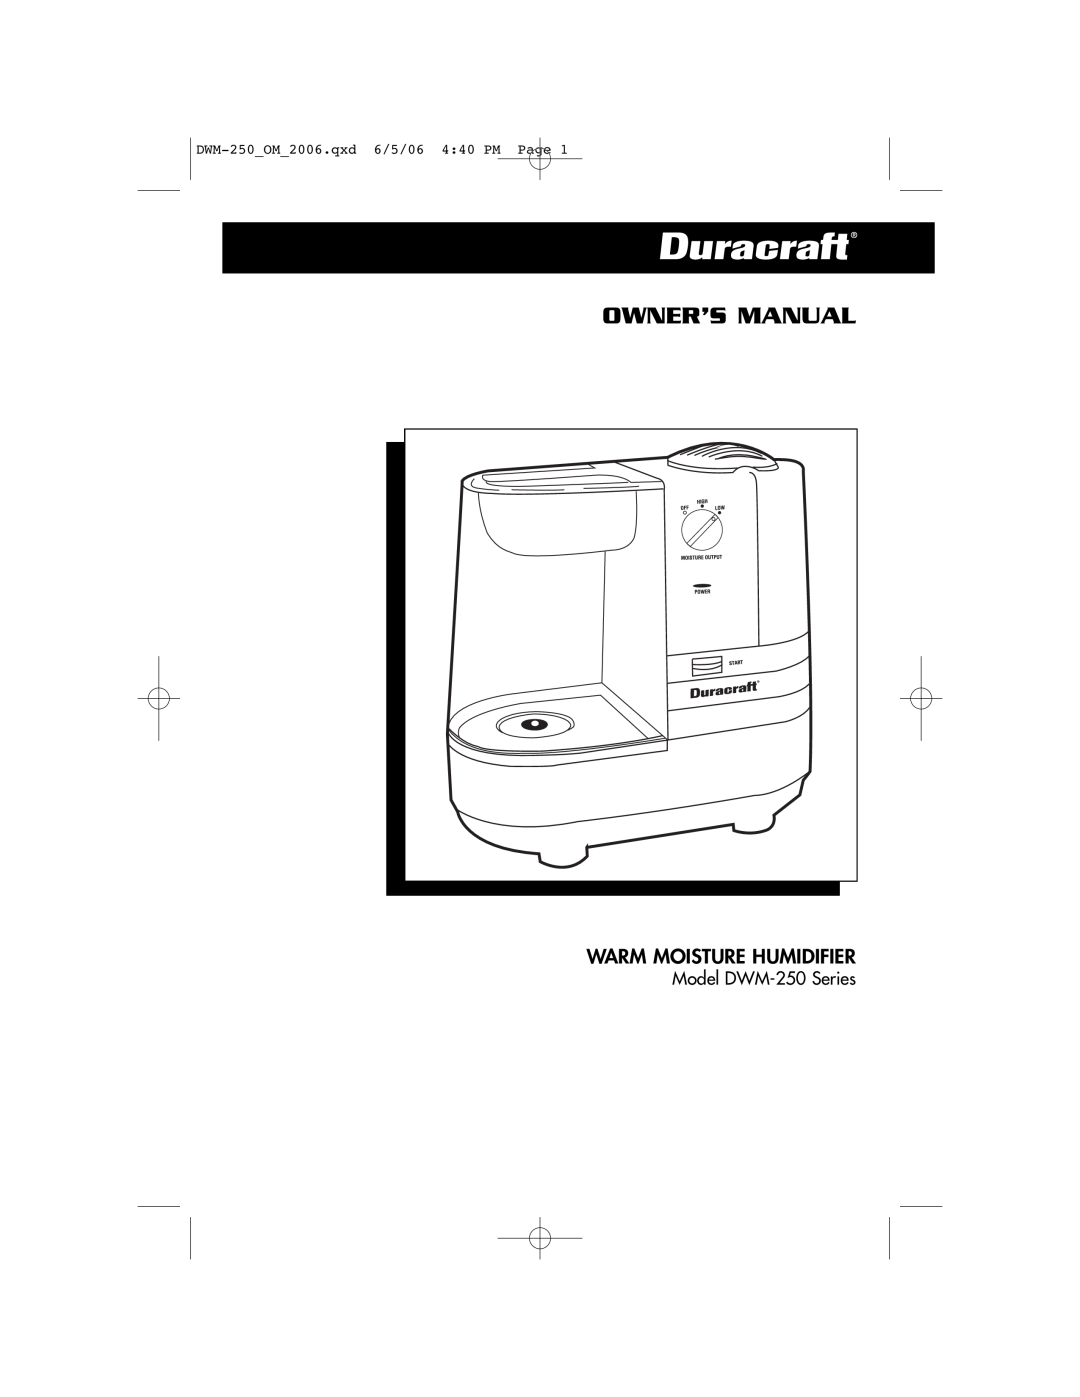 Duracraft owner manual Owner’S Manual, Warm Moisture Humidifier, DWM-250OM2006.qxd 6/5/06 440 PM Page 